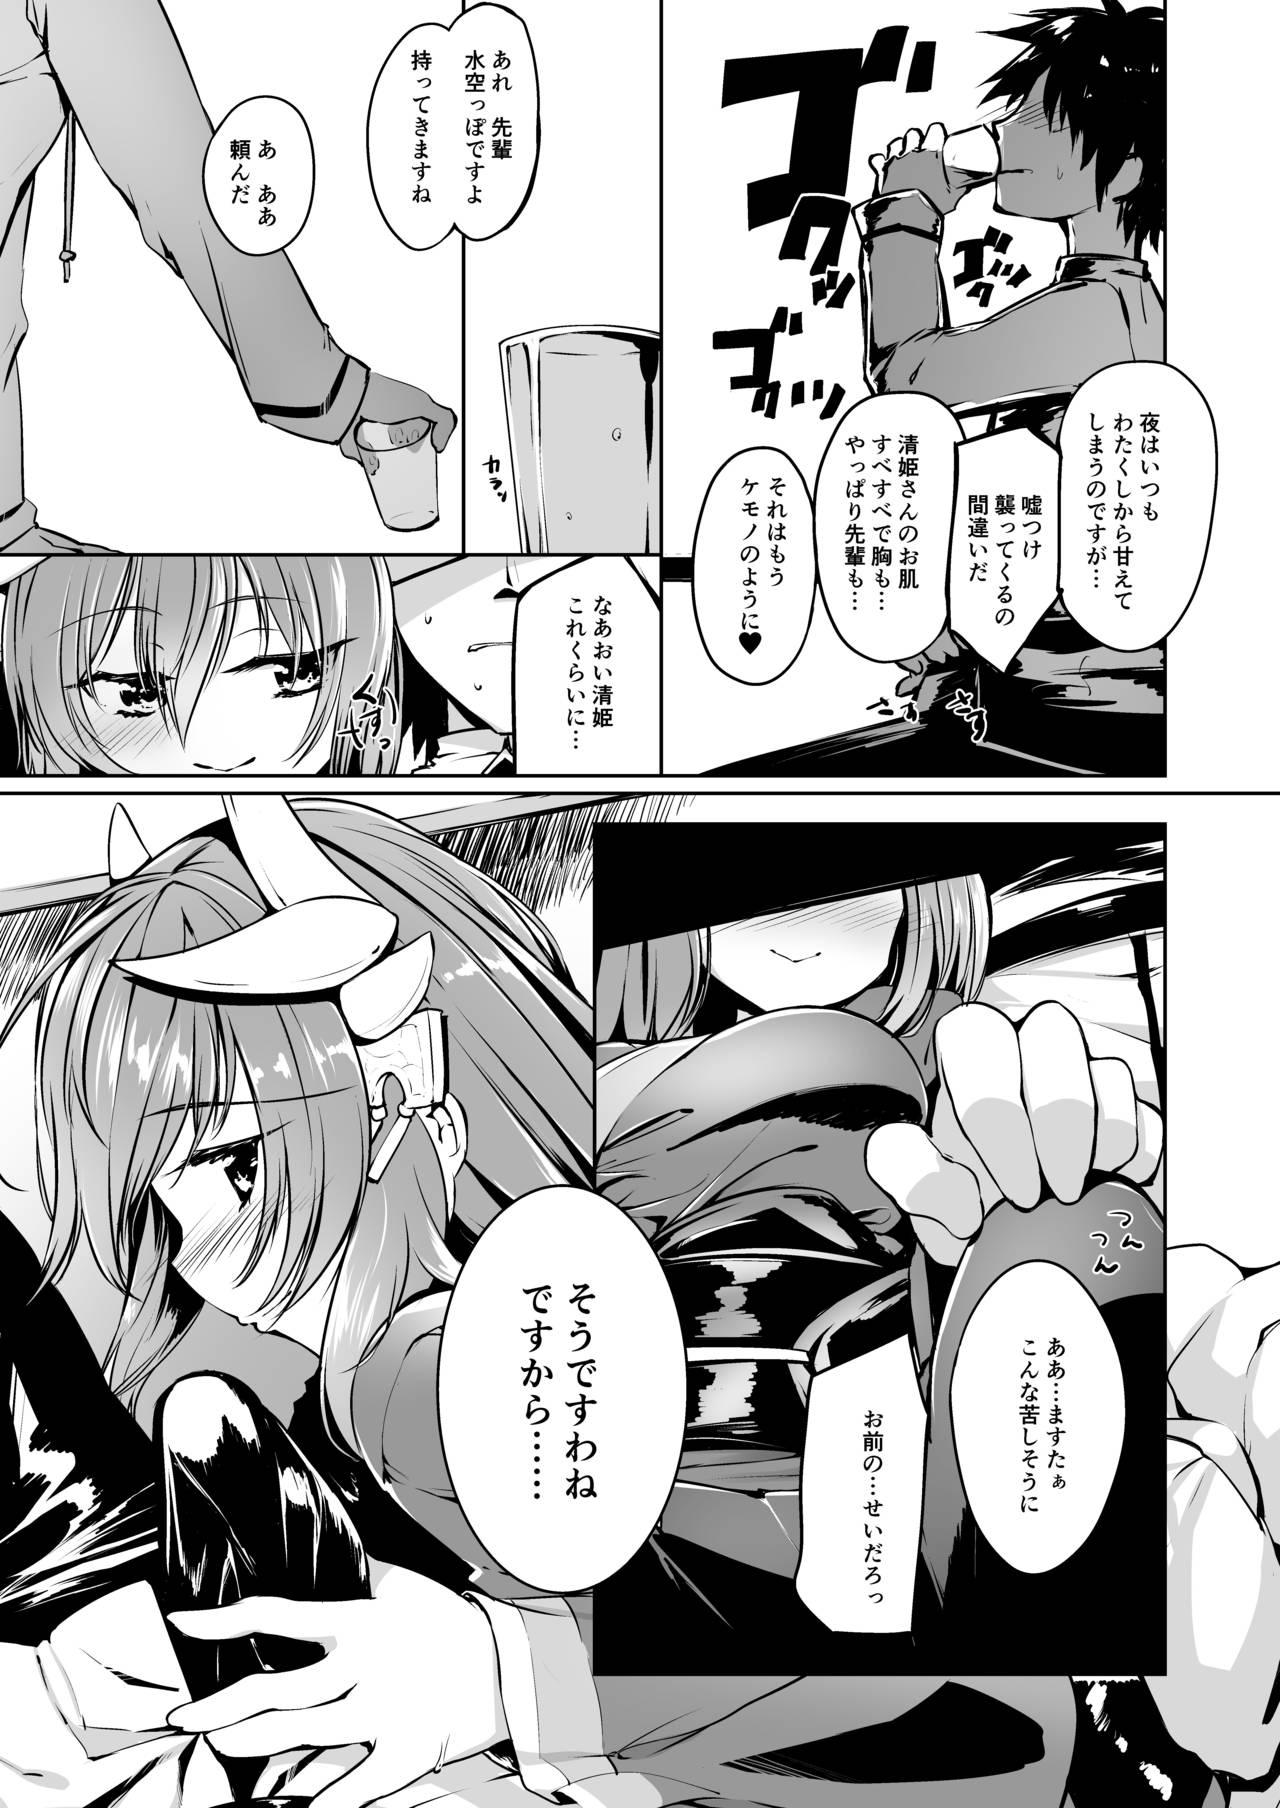 Transsexual Kiyohime Lovers vol. 02 - Fate grand order Show - Page 8